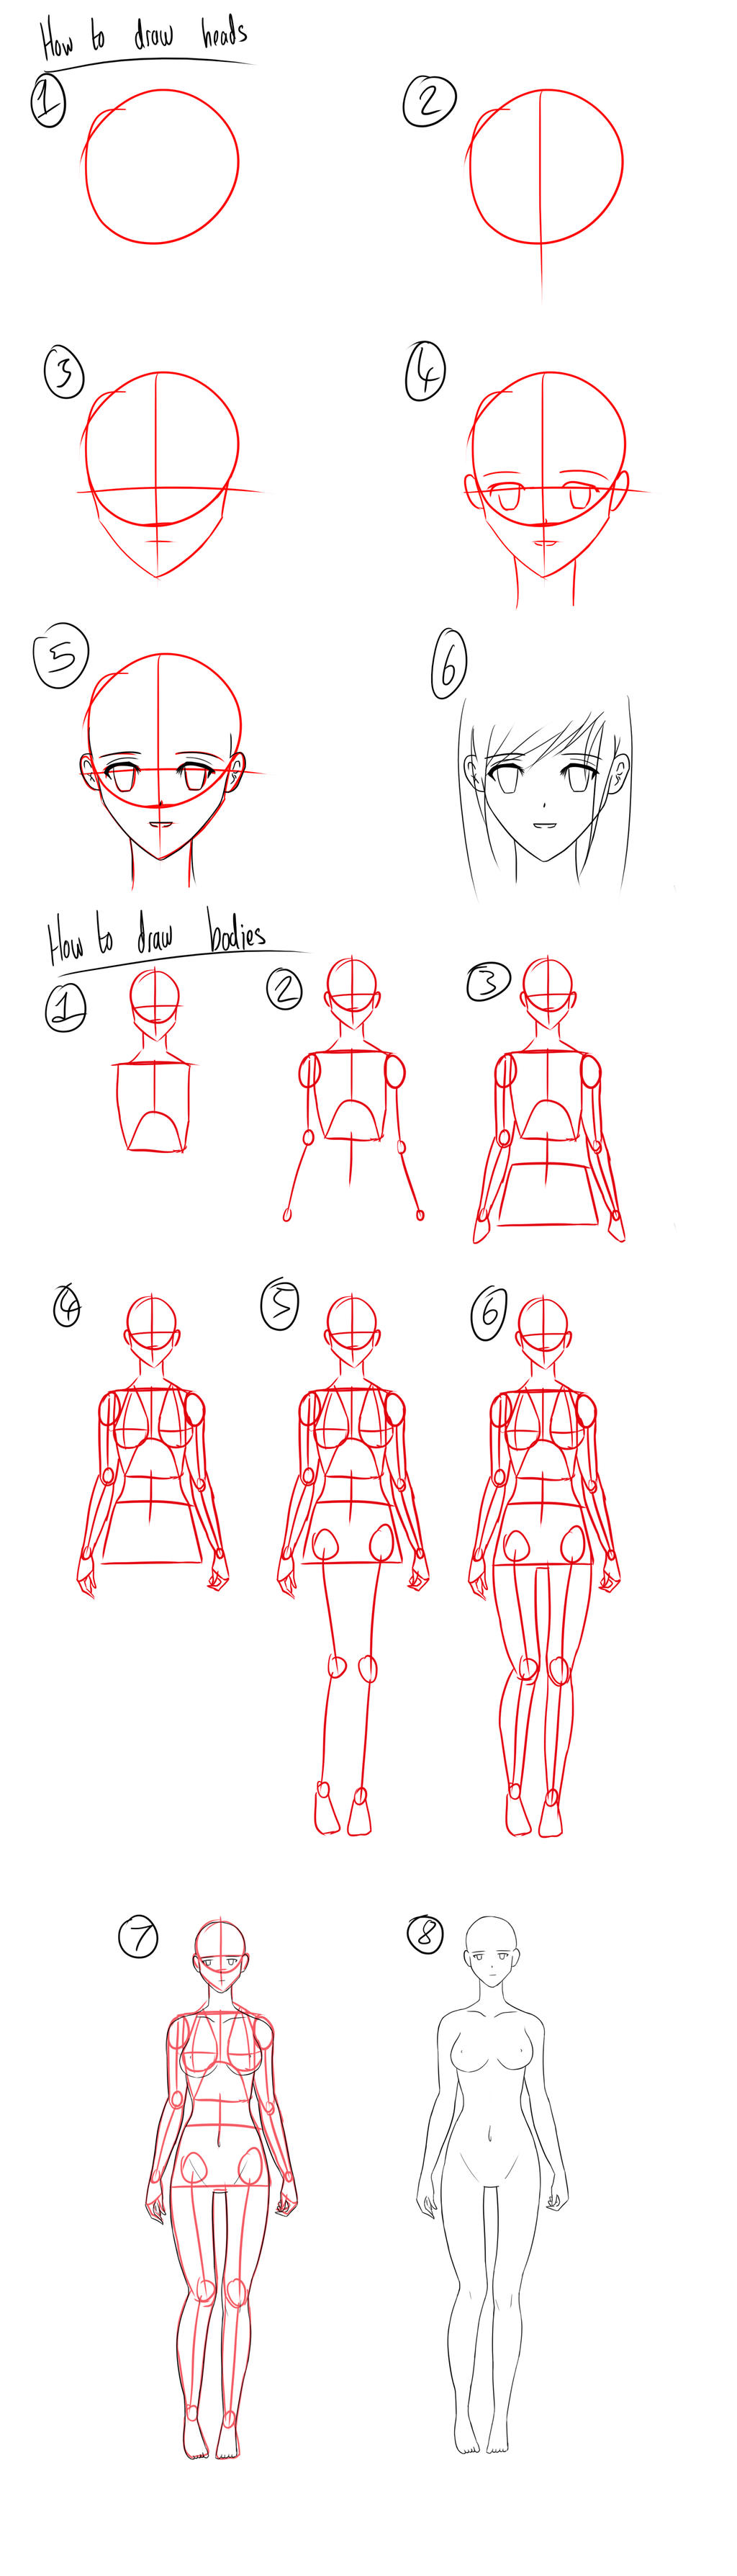 emulering bruger Reaktor Tutorial - How to Draw Anime Heads/Female Bodies by Micky-K on DeviantArt